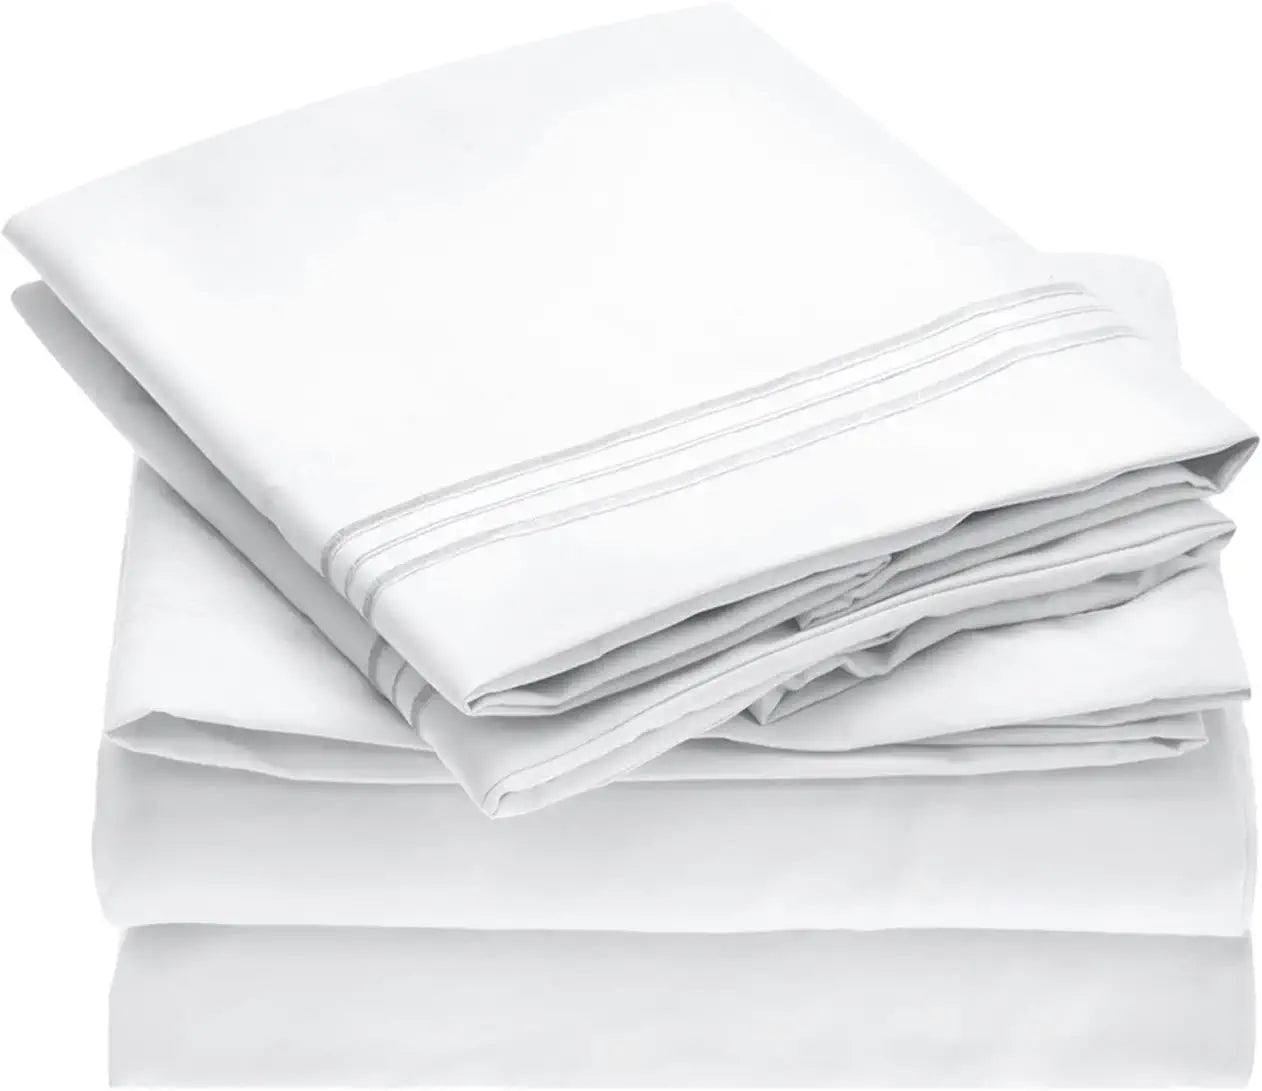 2100 Series Sally Collection Full Size Sheet Set (4PC)